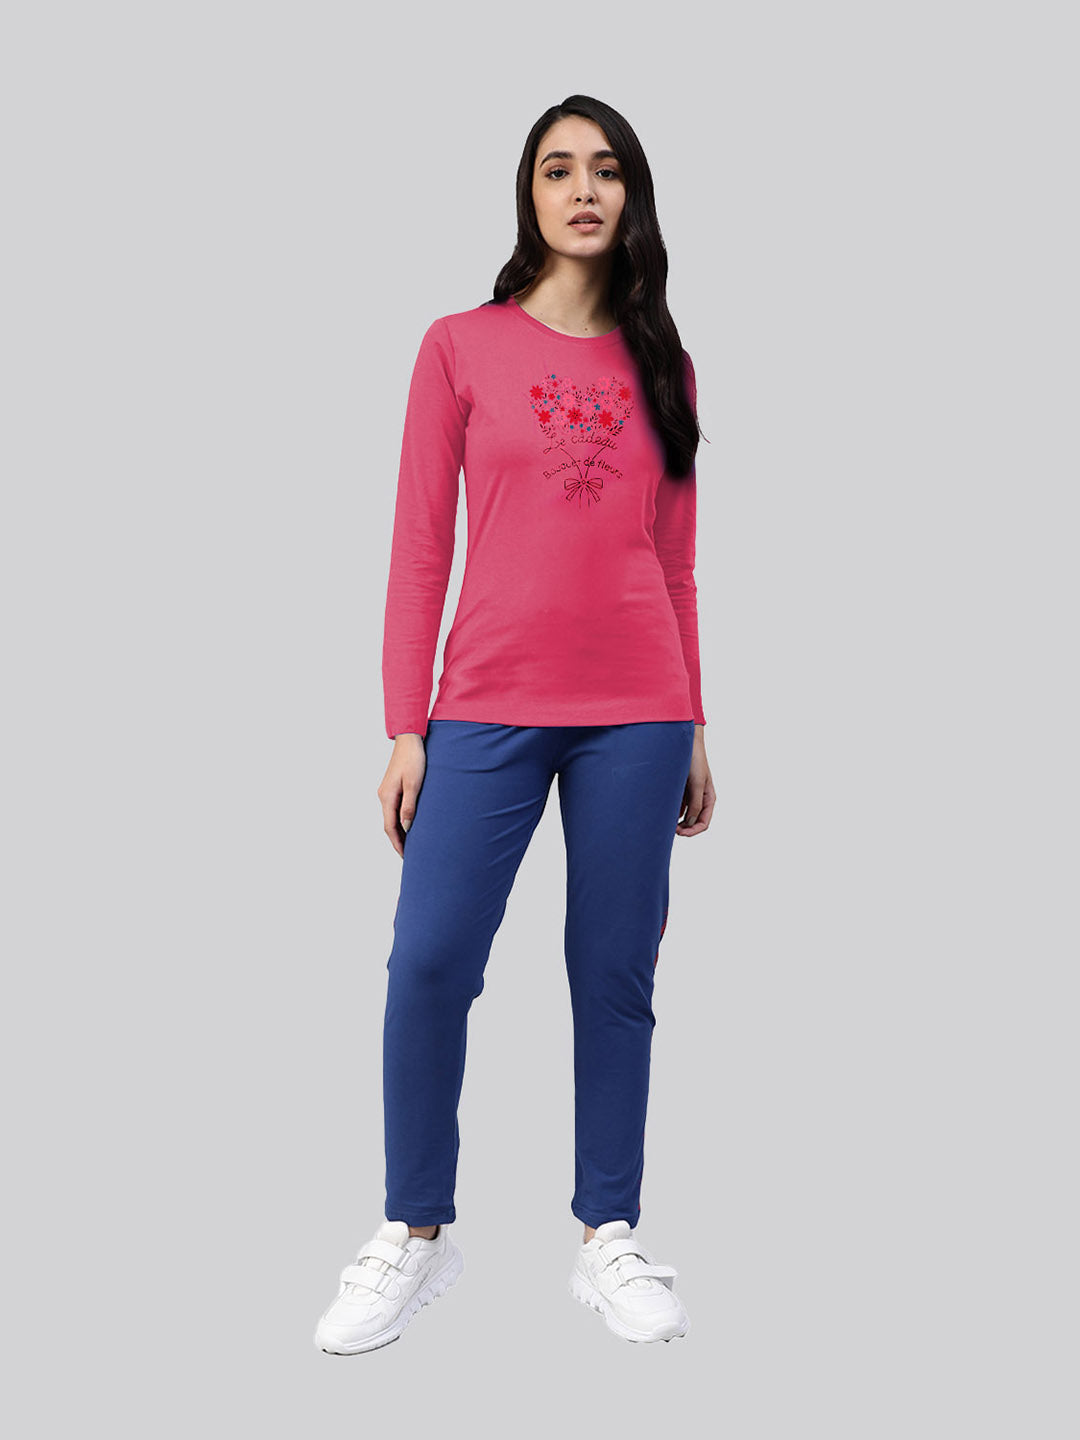 Pink printed round neck full sleeve t-shirt for women